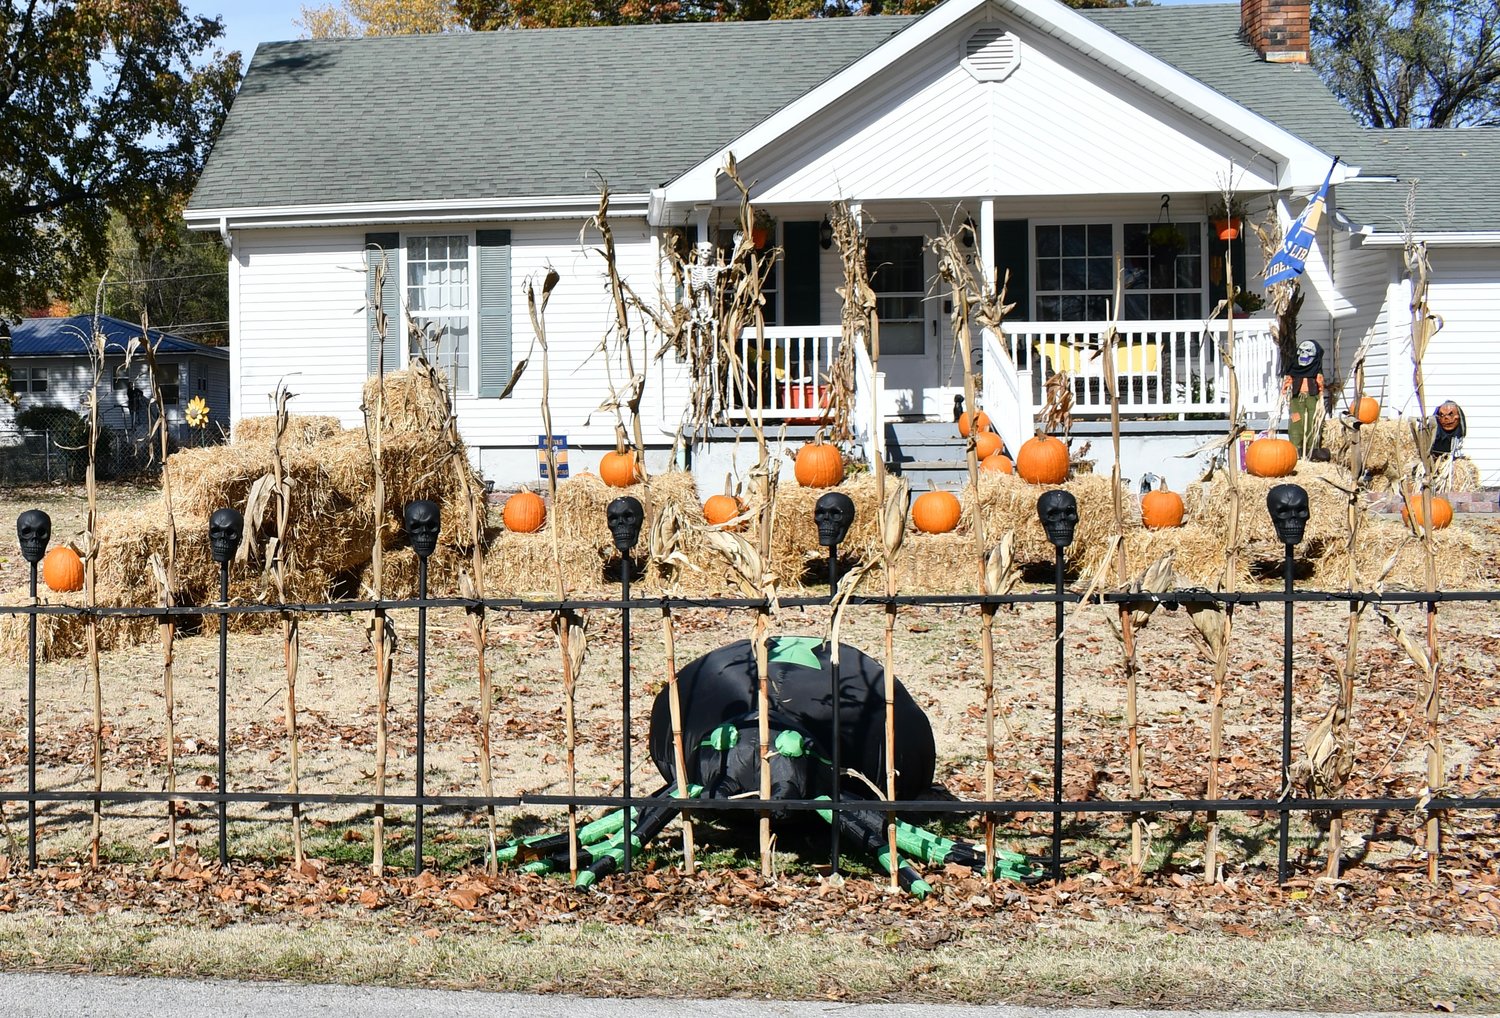 With decor and pumpkins galore, homeowners along Locust St. are getting into the spirit of the Halloween season.